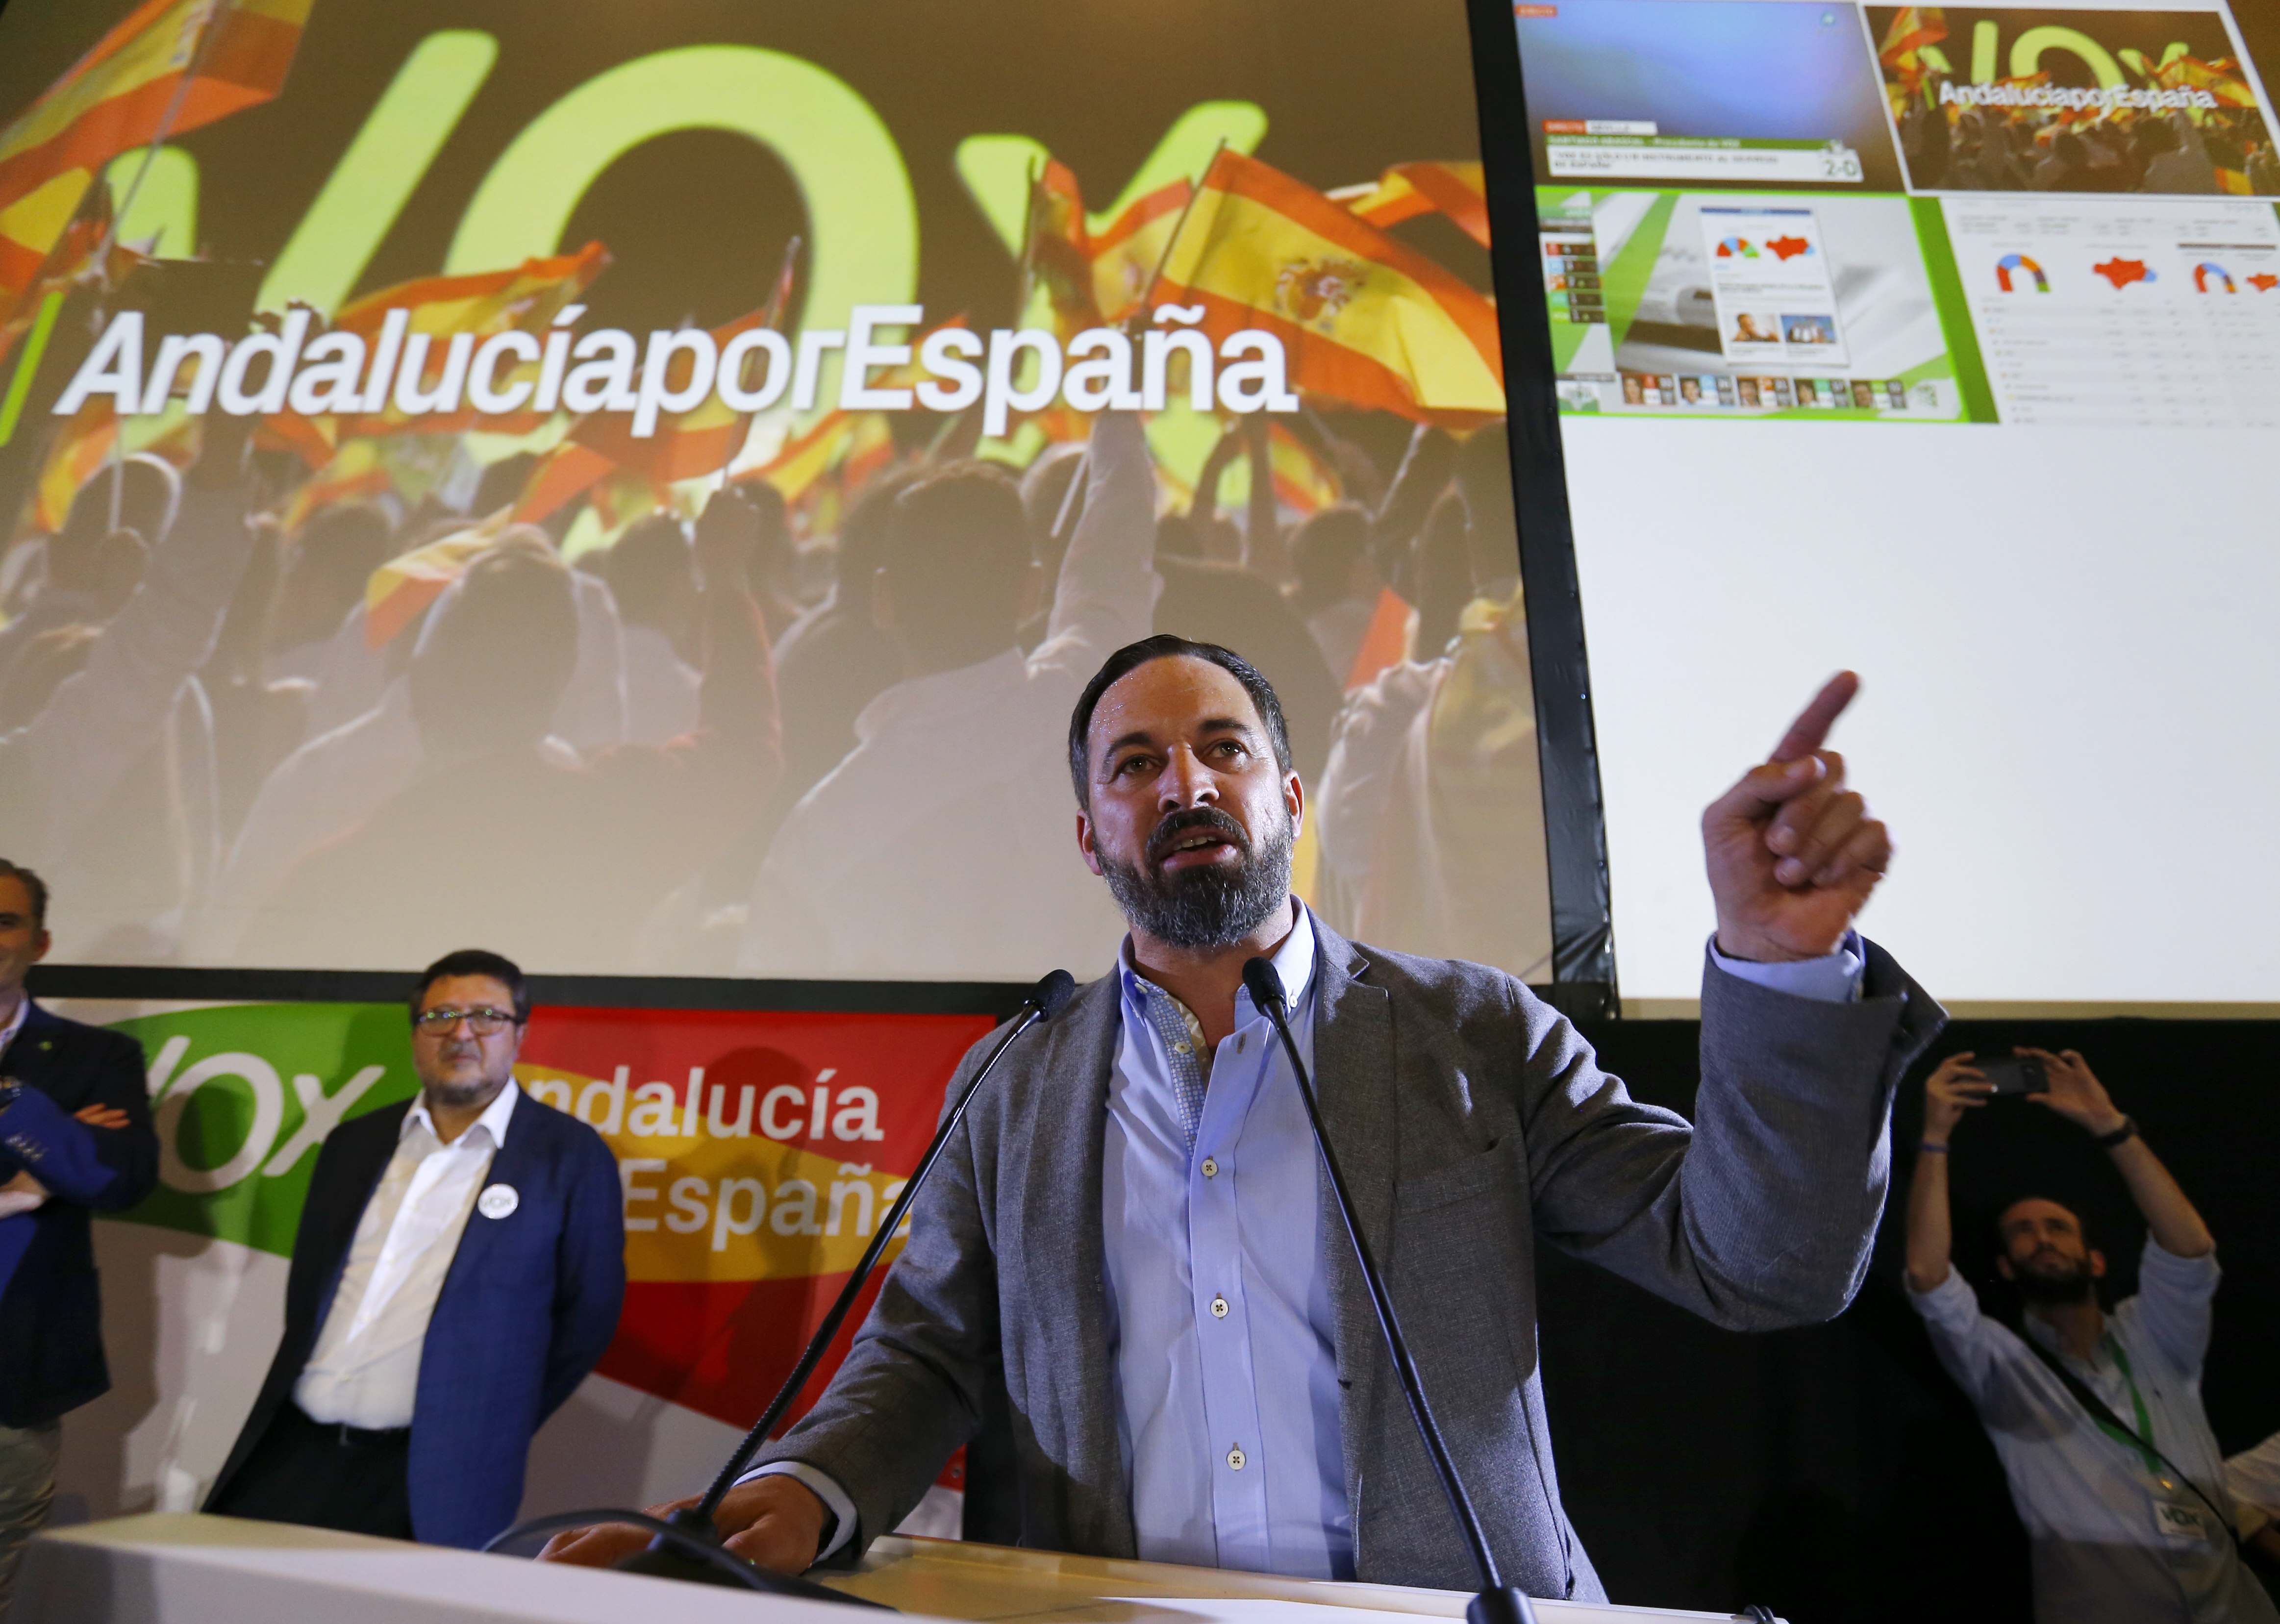 VOX leader Santiago Abascal after the election in Andalusia (by Reuters)